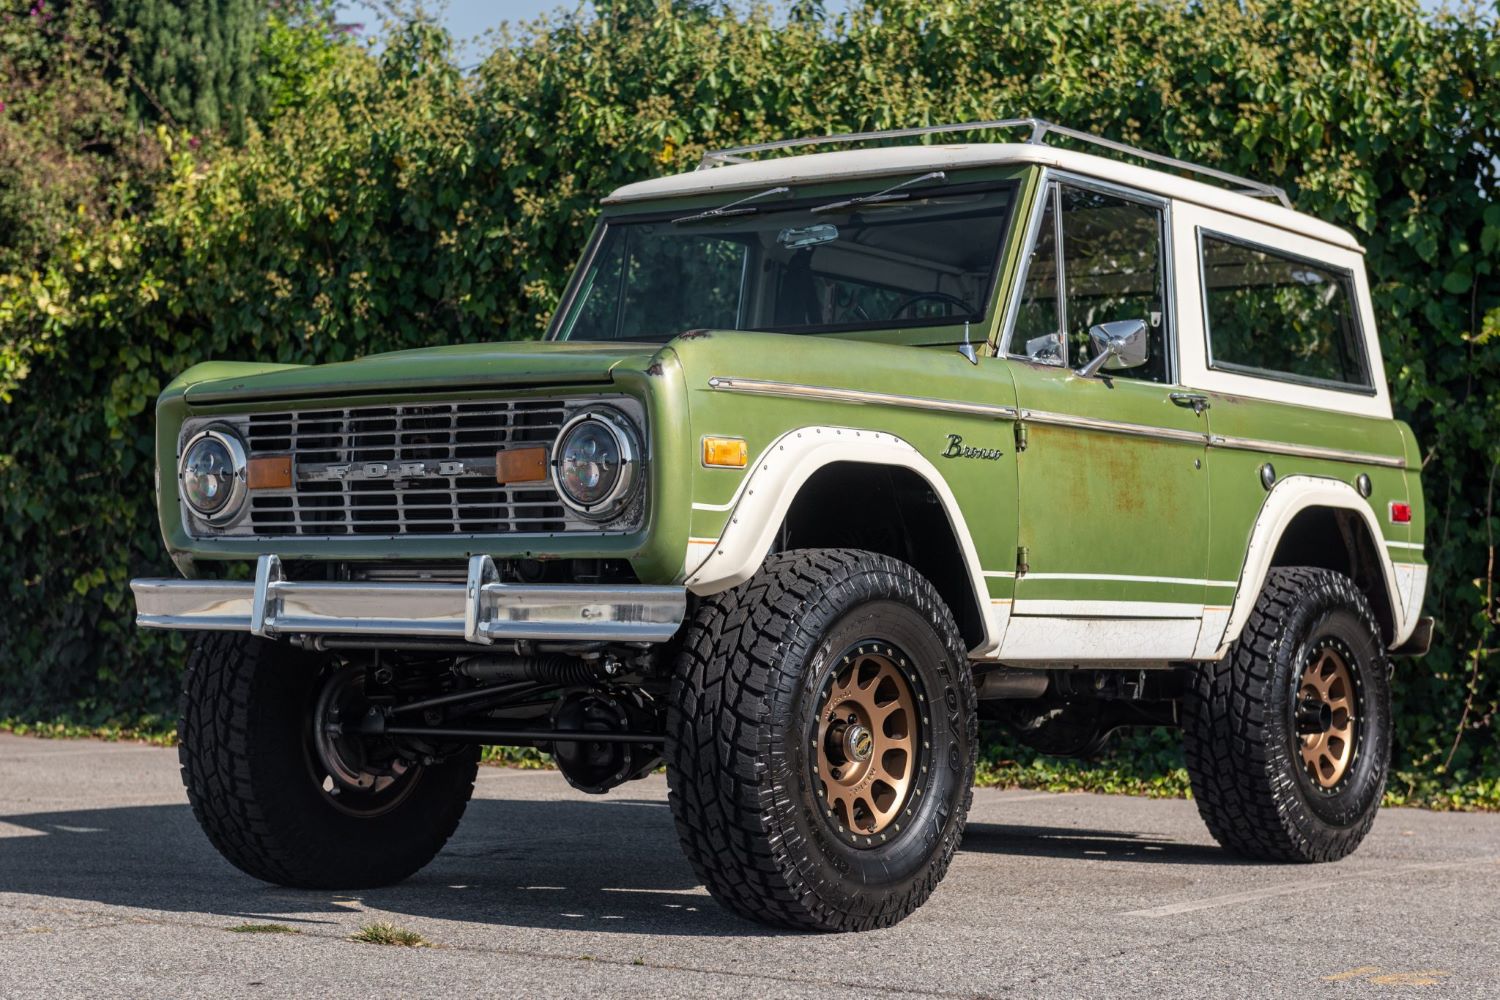 Coyote-Swapped 1975 Ford Bronco Is The Best Of Both Worlds